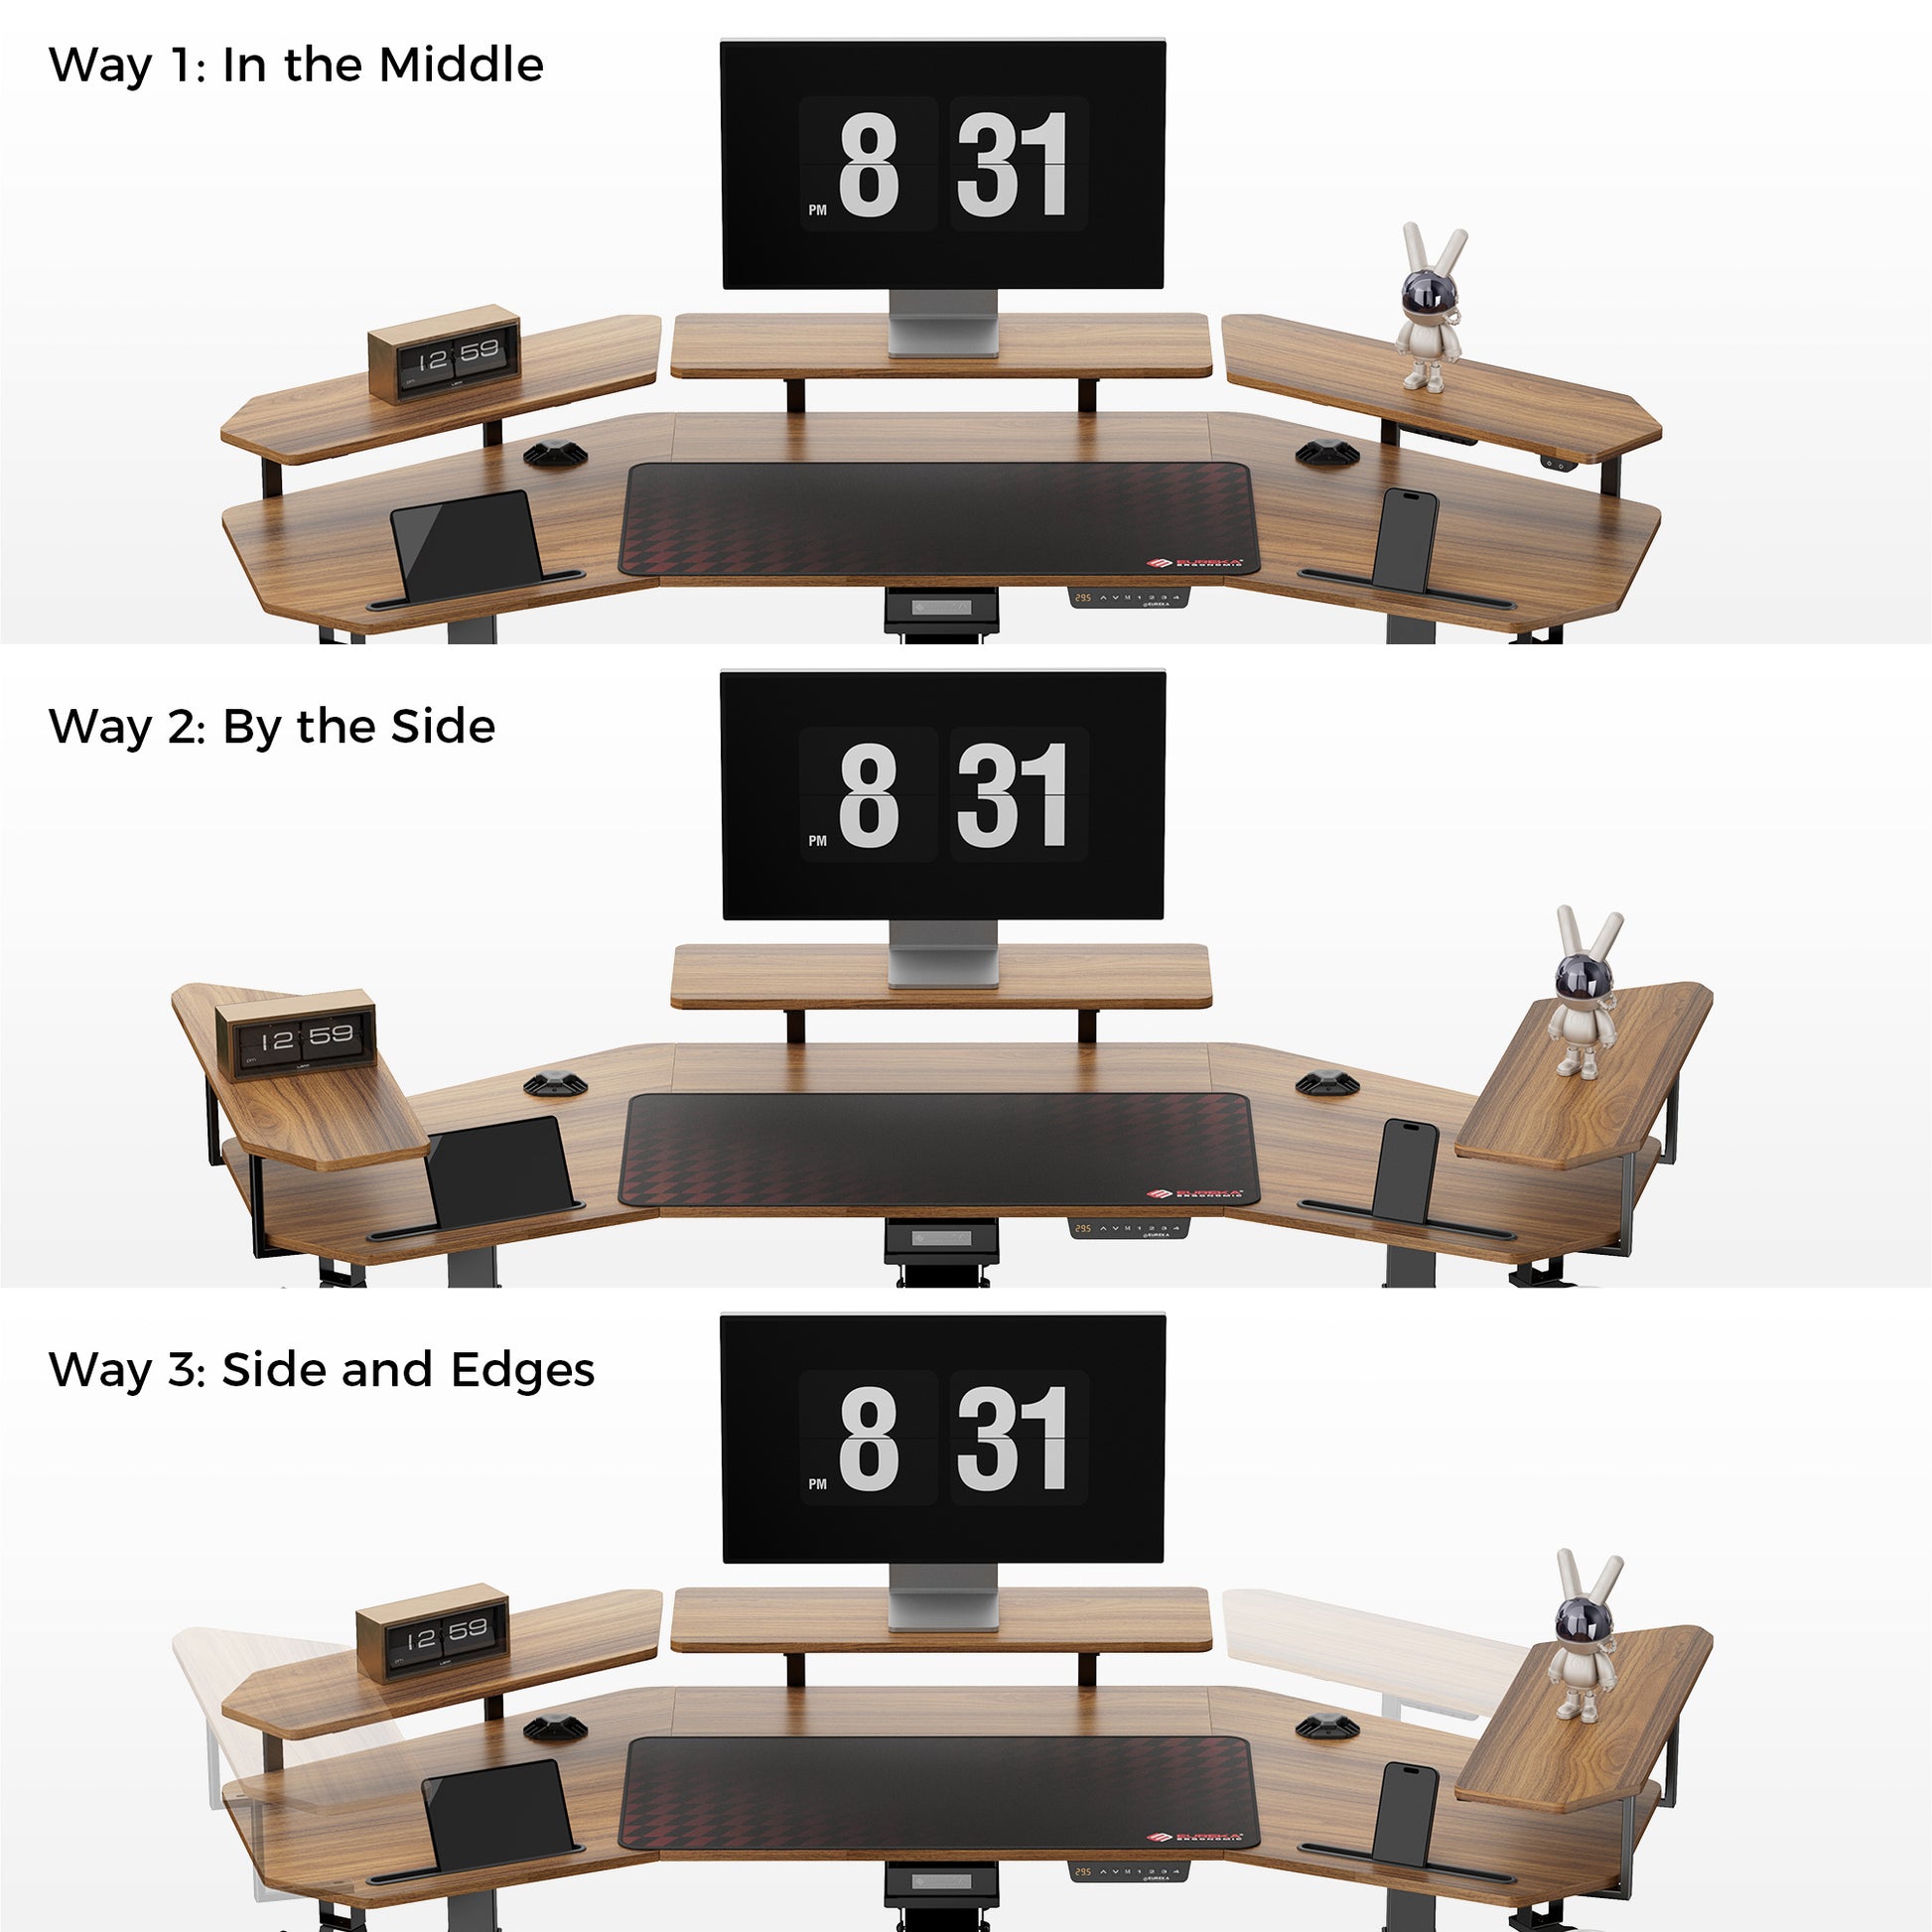 Different Ways to install the monitor shelves for your needs